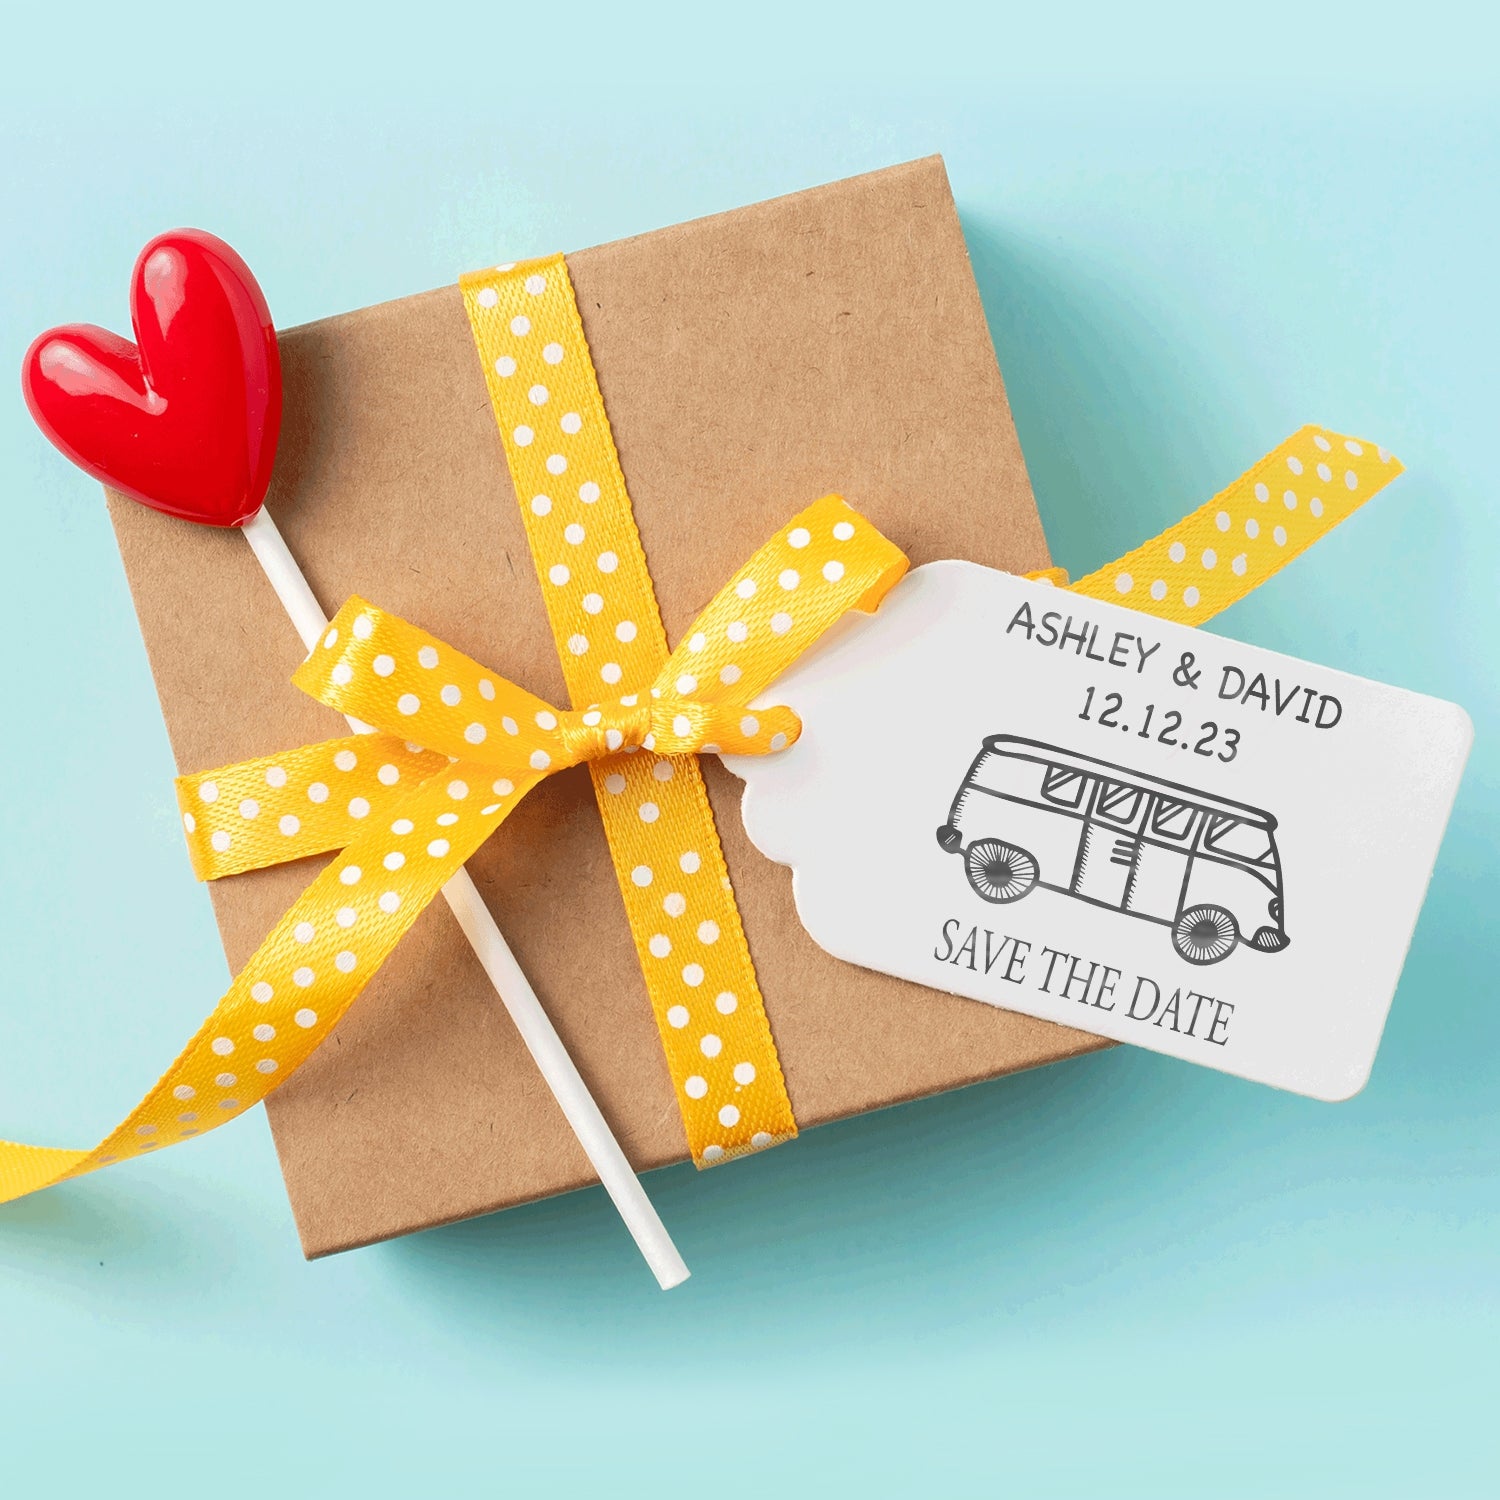 Custom Love Bus Wedding Save the Date Rubber Stamp wd1